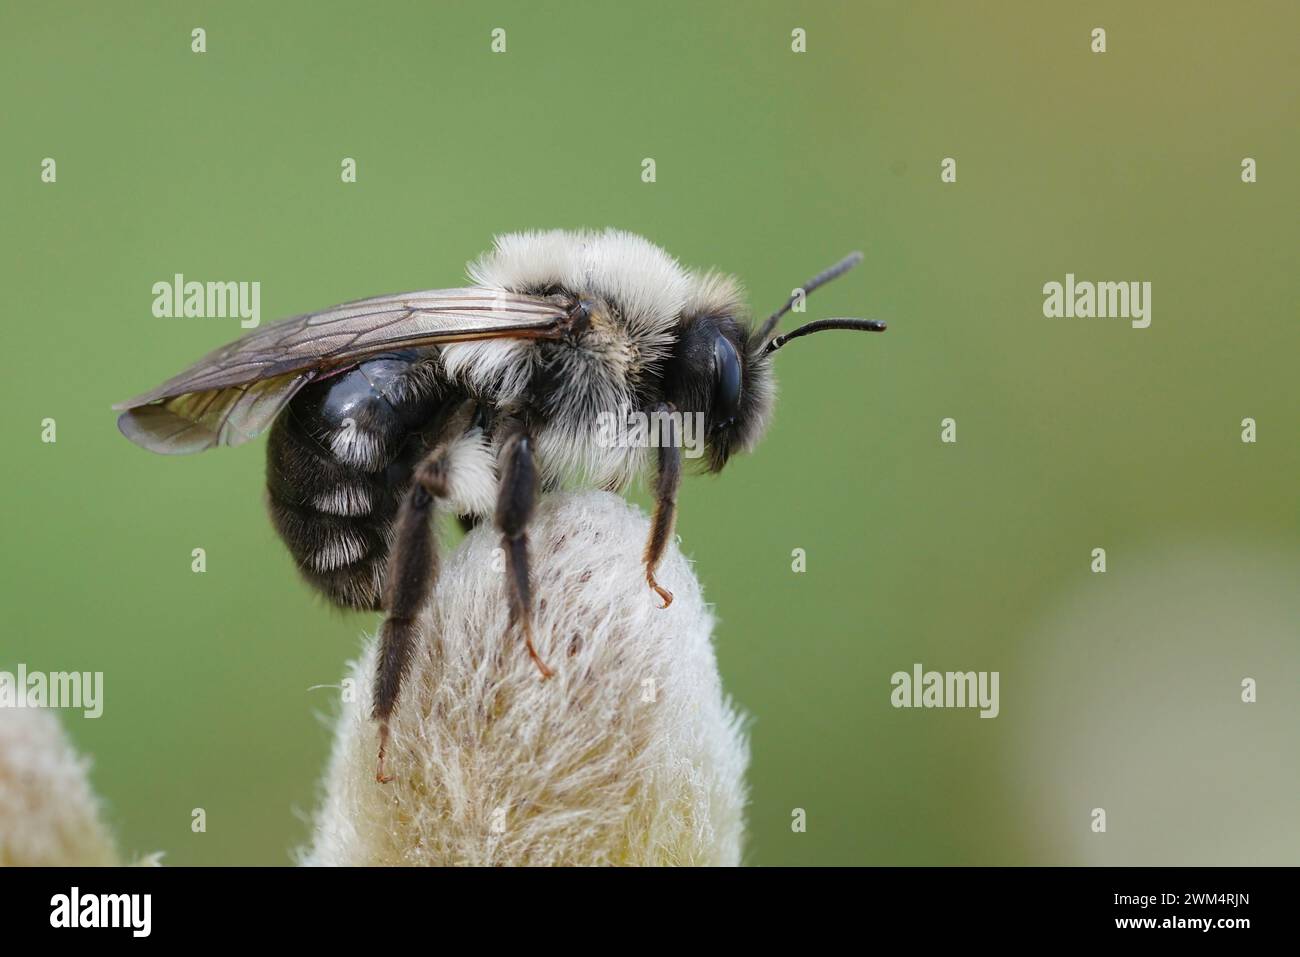 Natural closeup on a female Gray-backed mining bee, Andrena vaga, sitting on top of a Goat Willow catkin Stock Photo